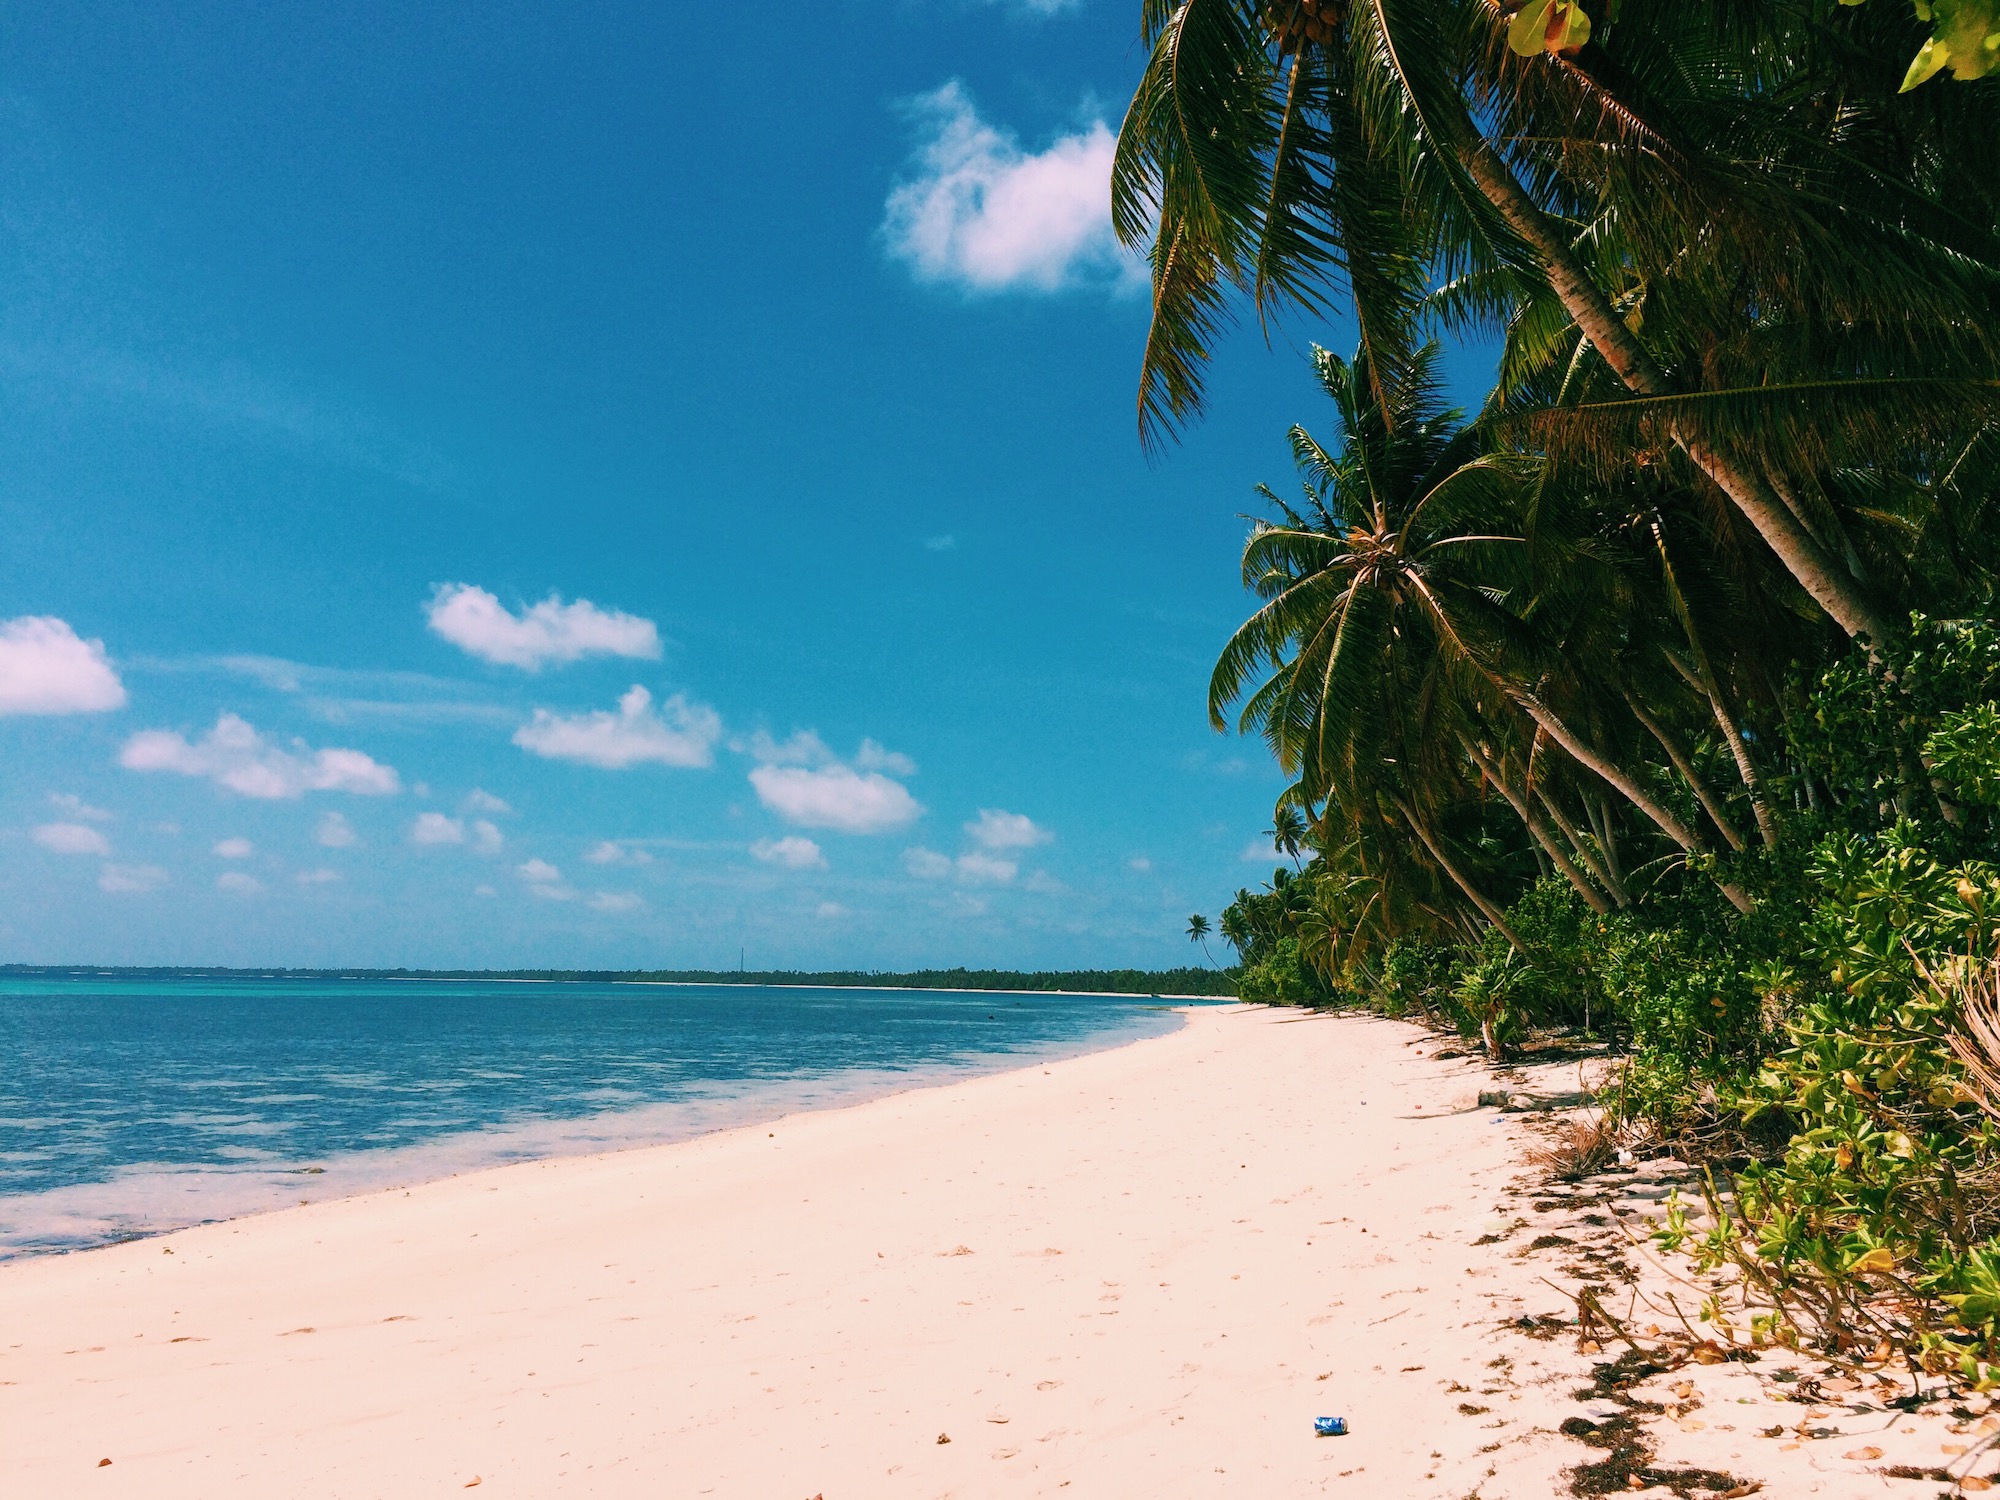 Secluded beach in Majuro, Marshall Islands